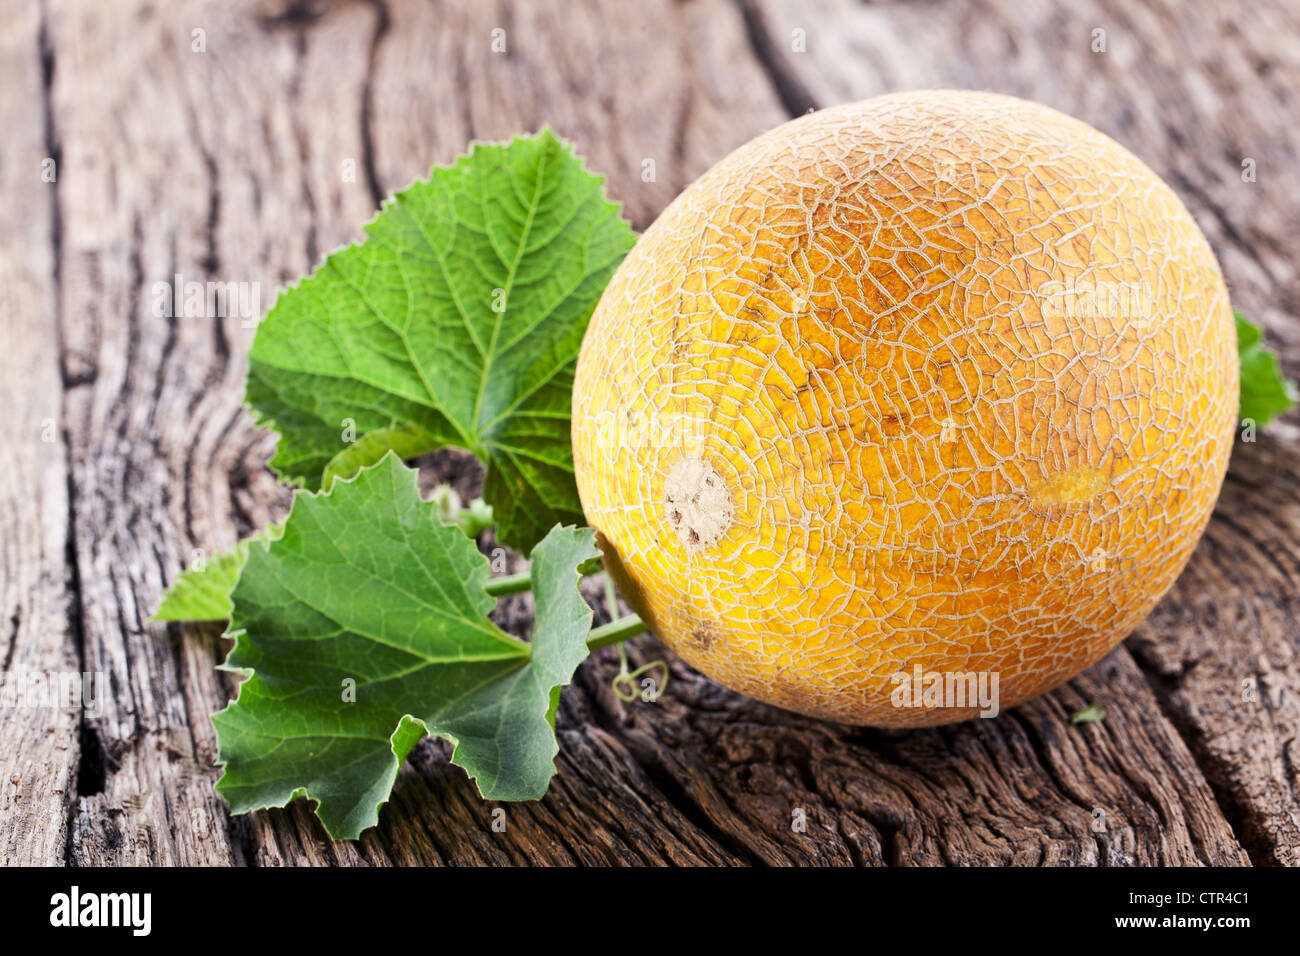 Melon with the leaves on the old wooden table. Stock Photo